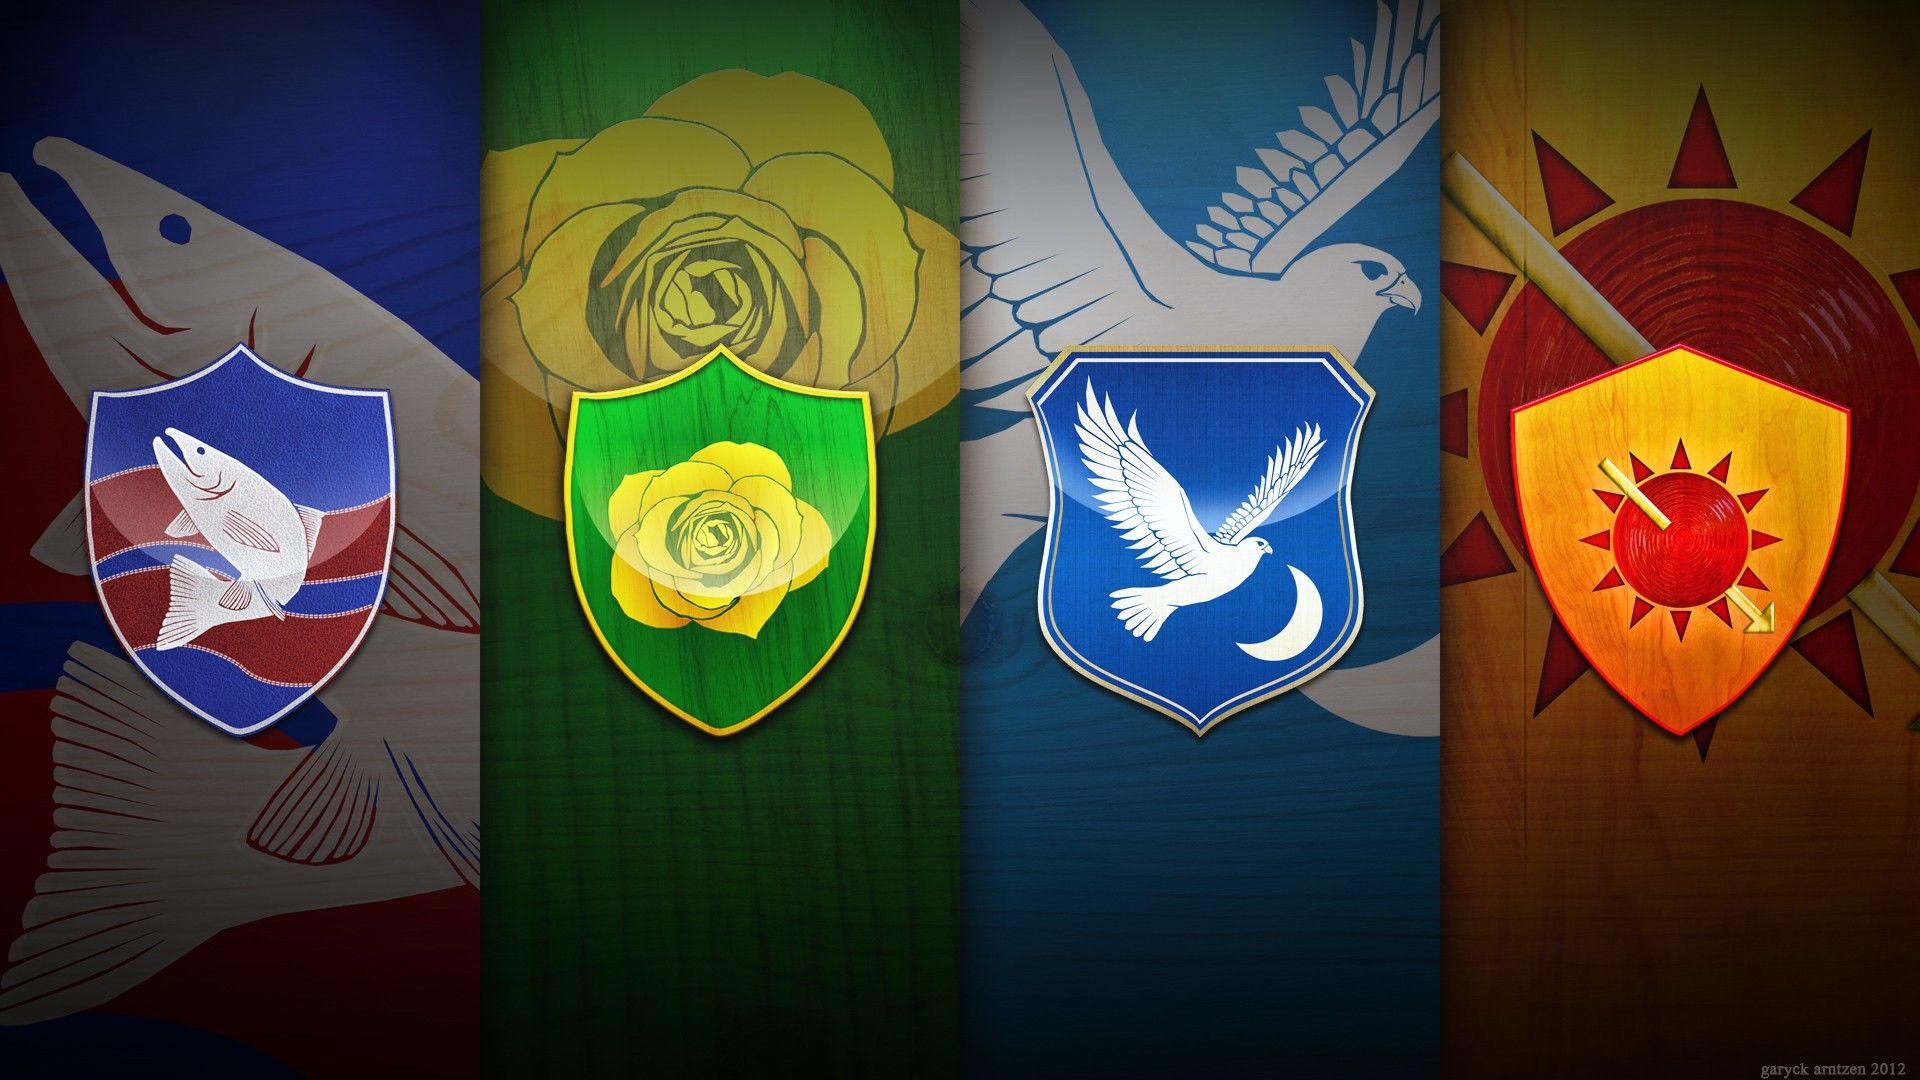 houses, Game of Thrones, emblems, Noble, westeros, House Arryn